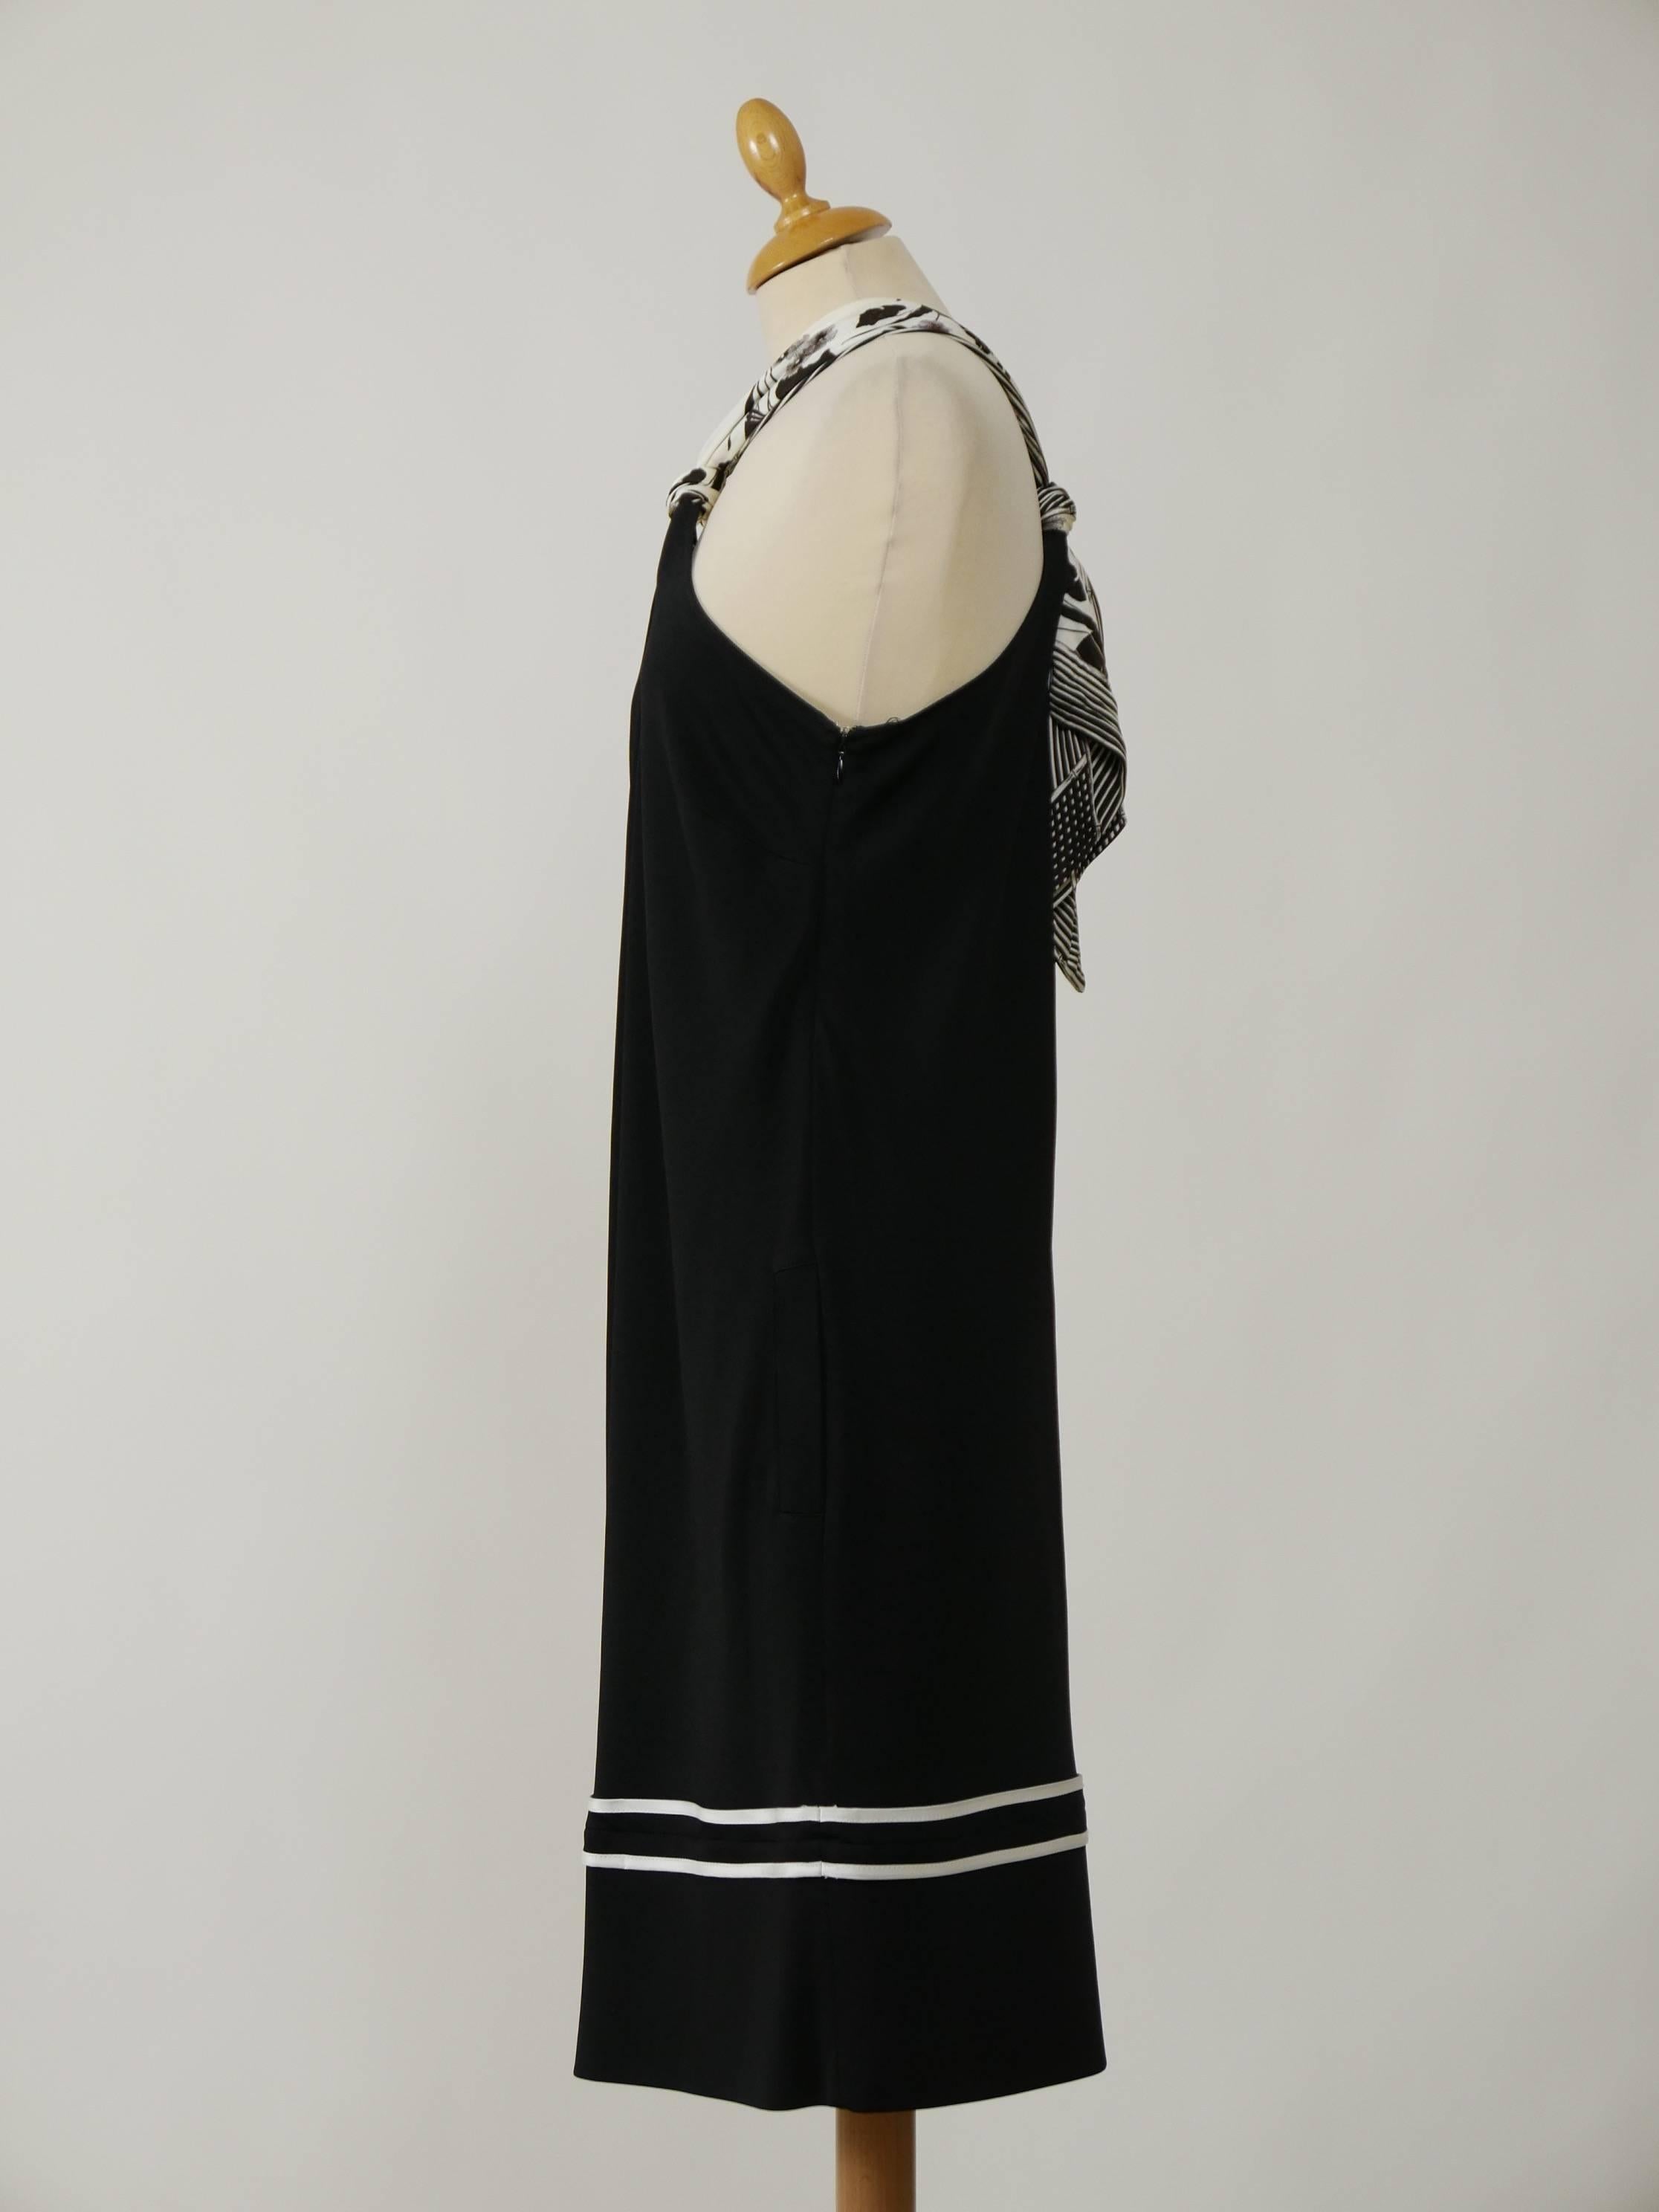 This gorgeous Roberto Cavalli dress is in black jersey with white details. It has straight line, side pockets, side zip closure and strap for the neck with black and white floral print.

Measurement (unstretched):
Label size 42 Italian / 8